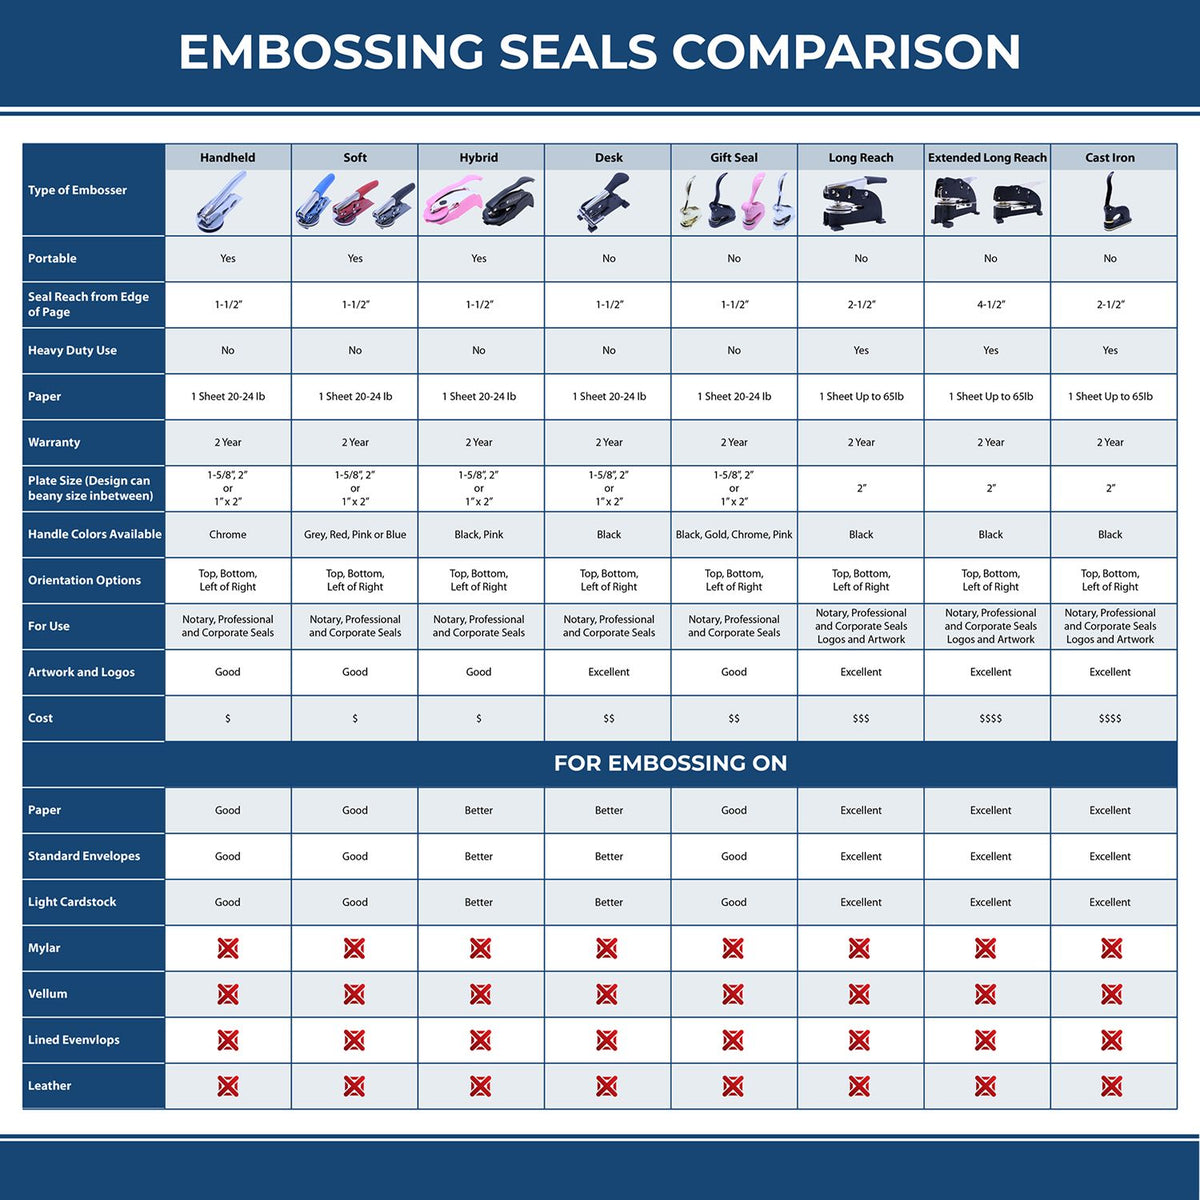 A comparison chart for the different types of mount models available for the Heavy Duty Cast Iron Kansas Engineer Seal Embosser.